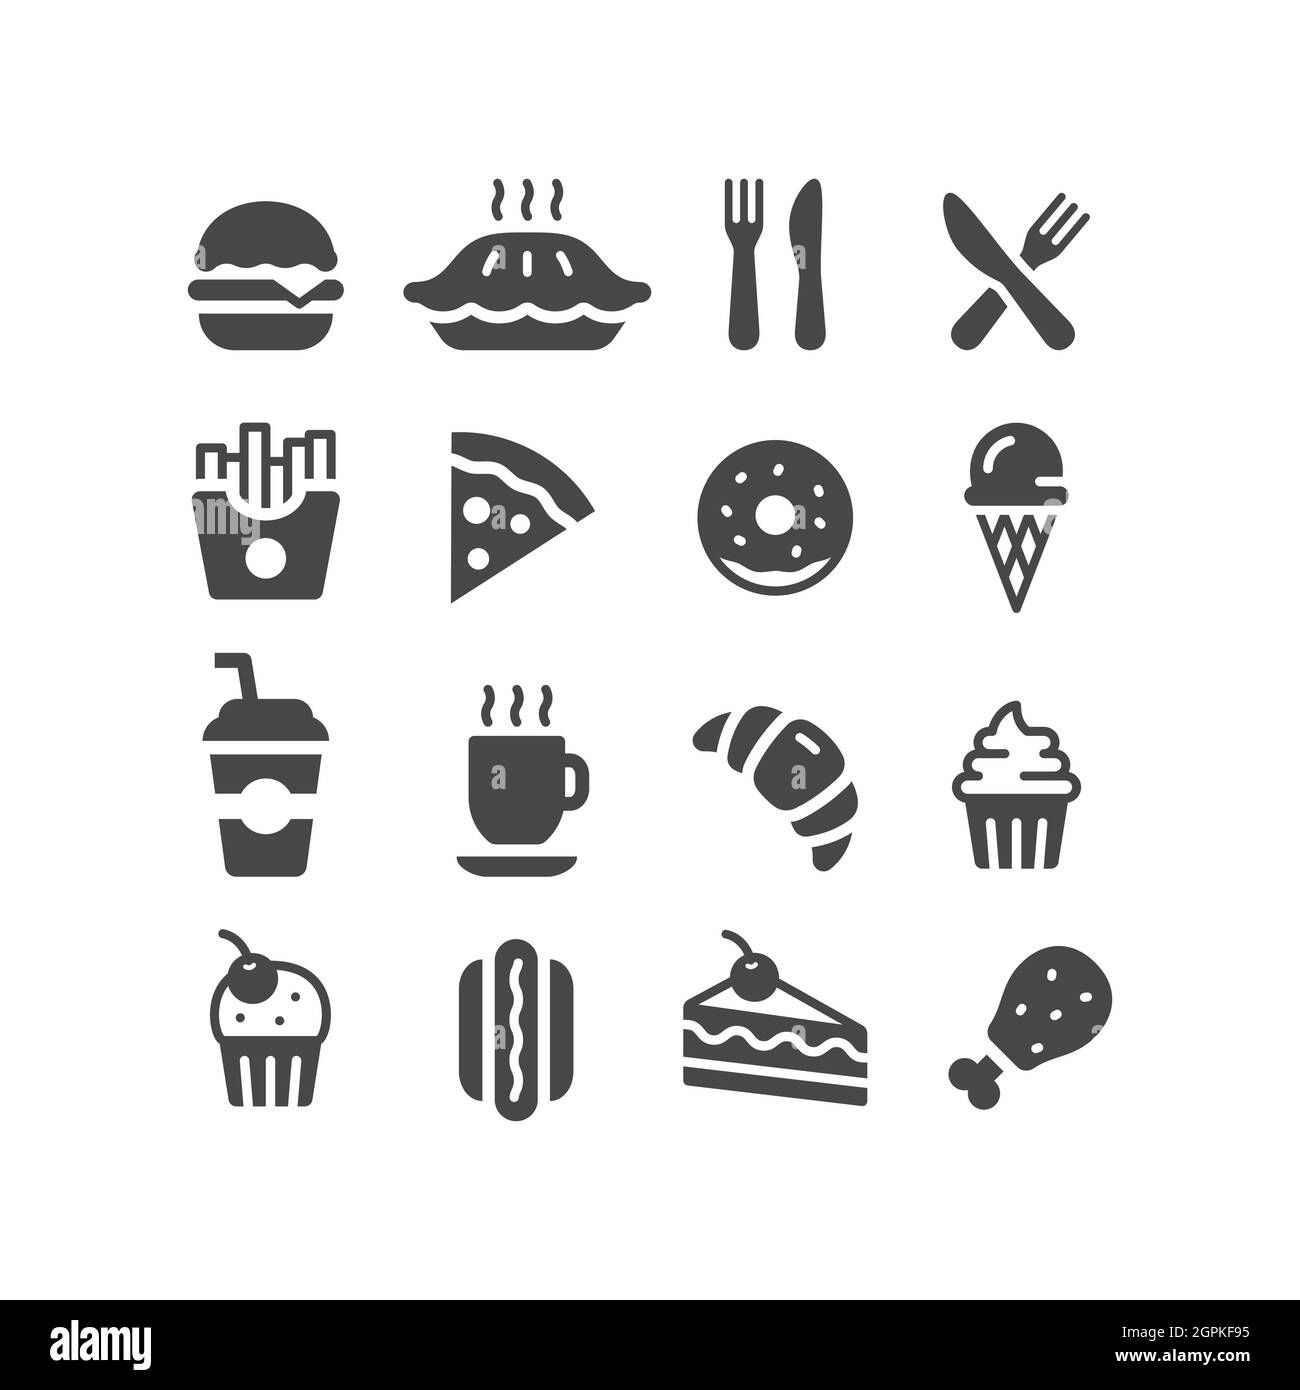 Fast food restaurant or diner vector icon set Stock Vector